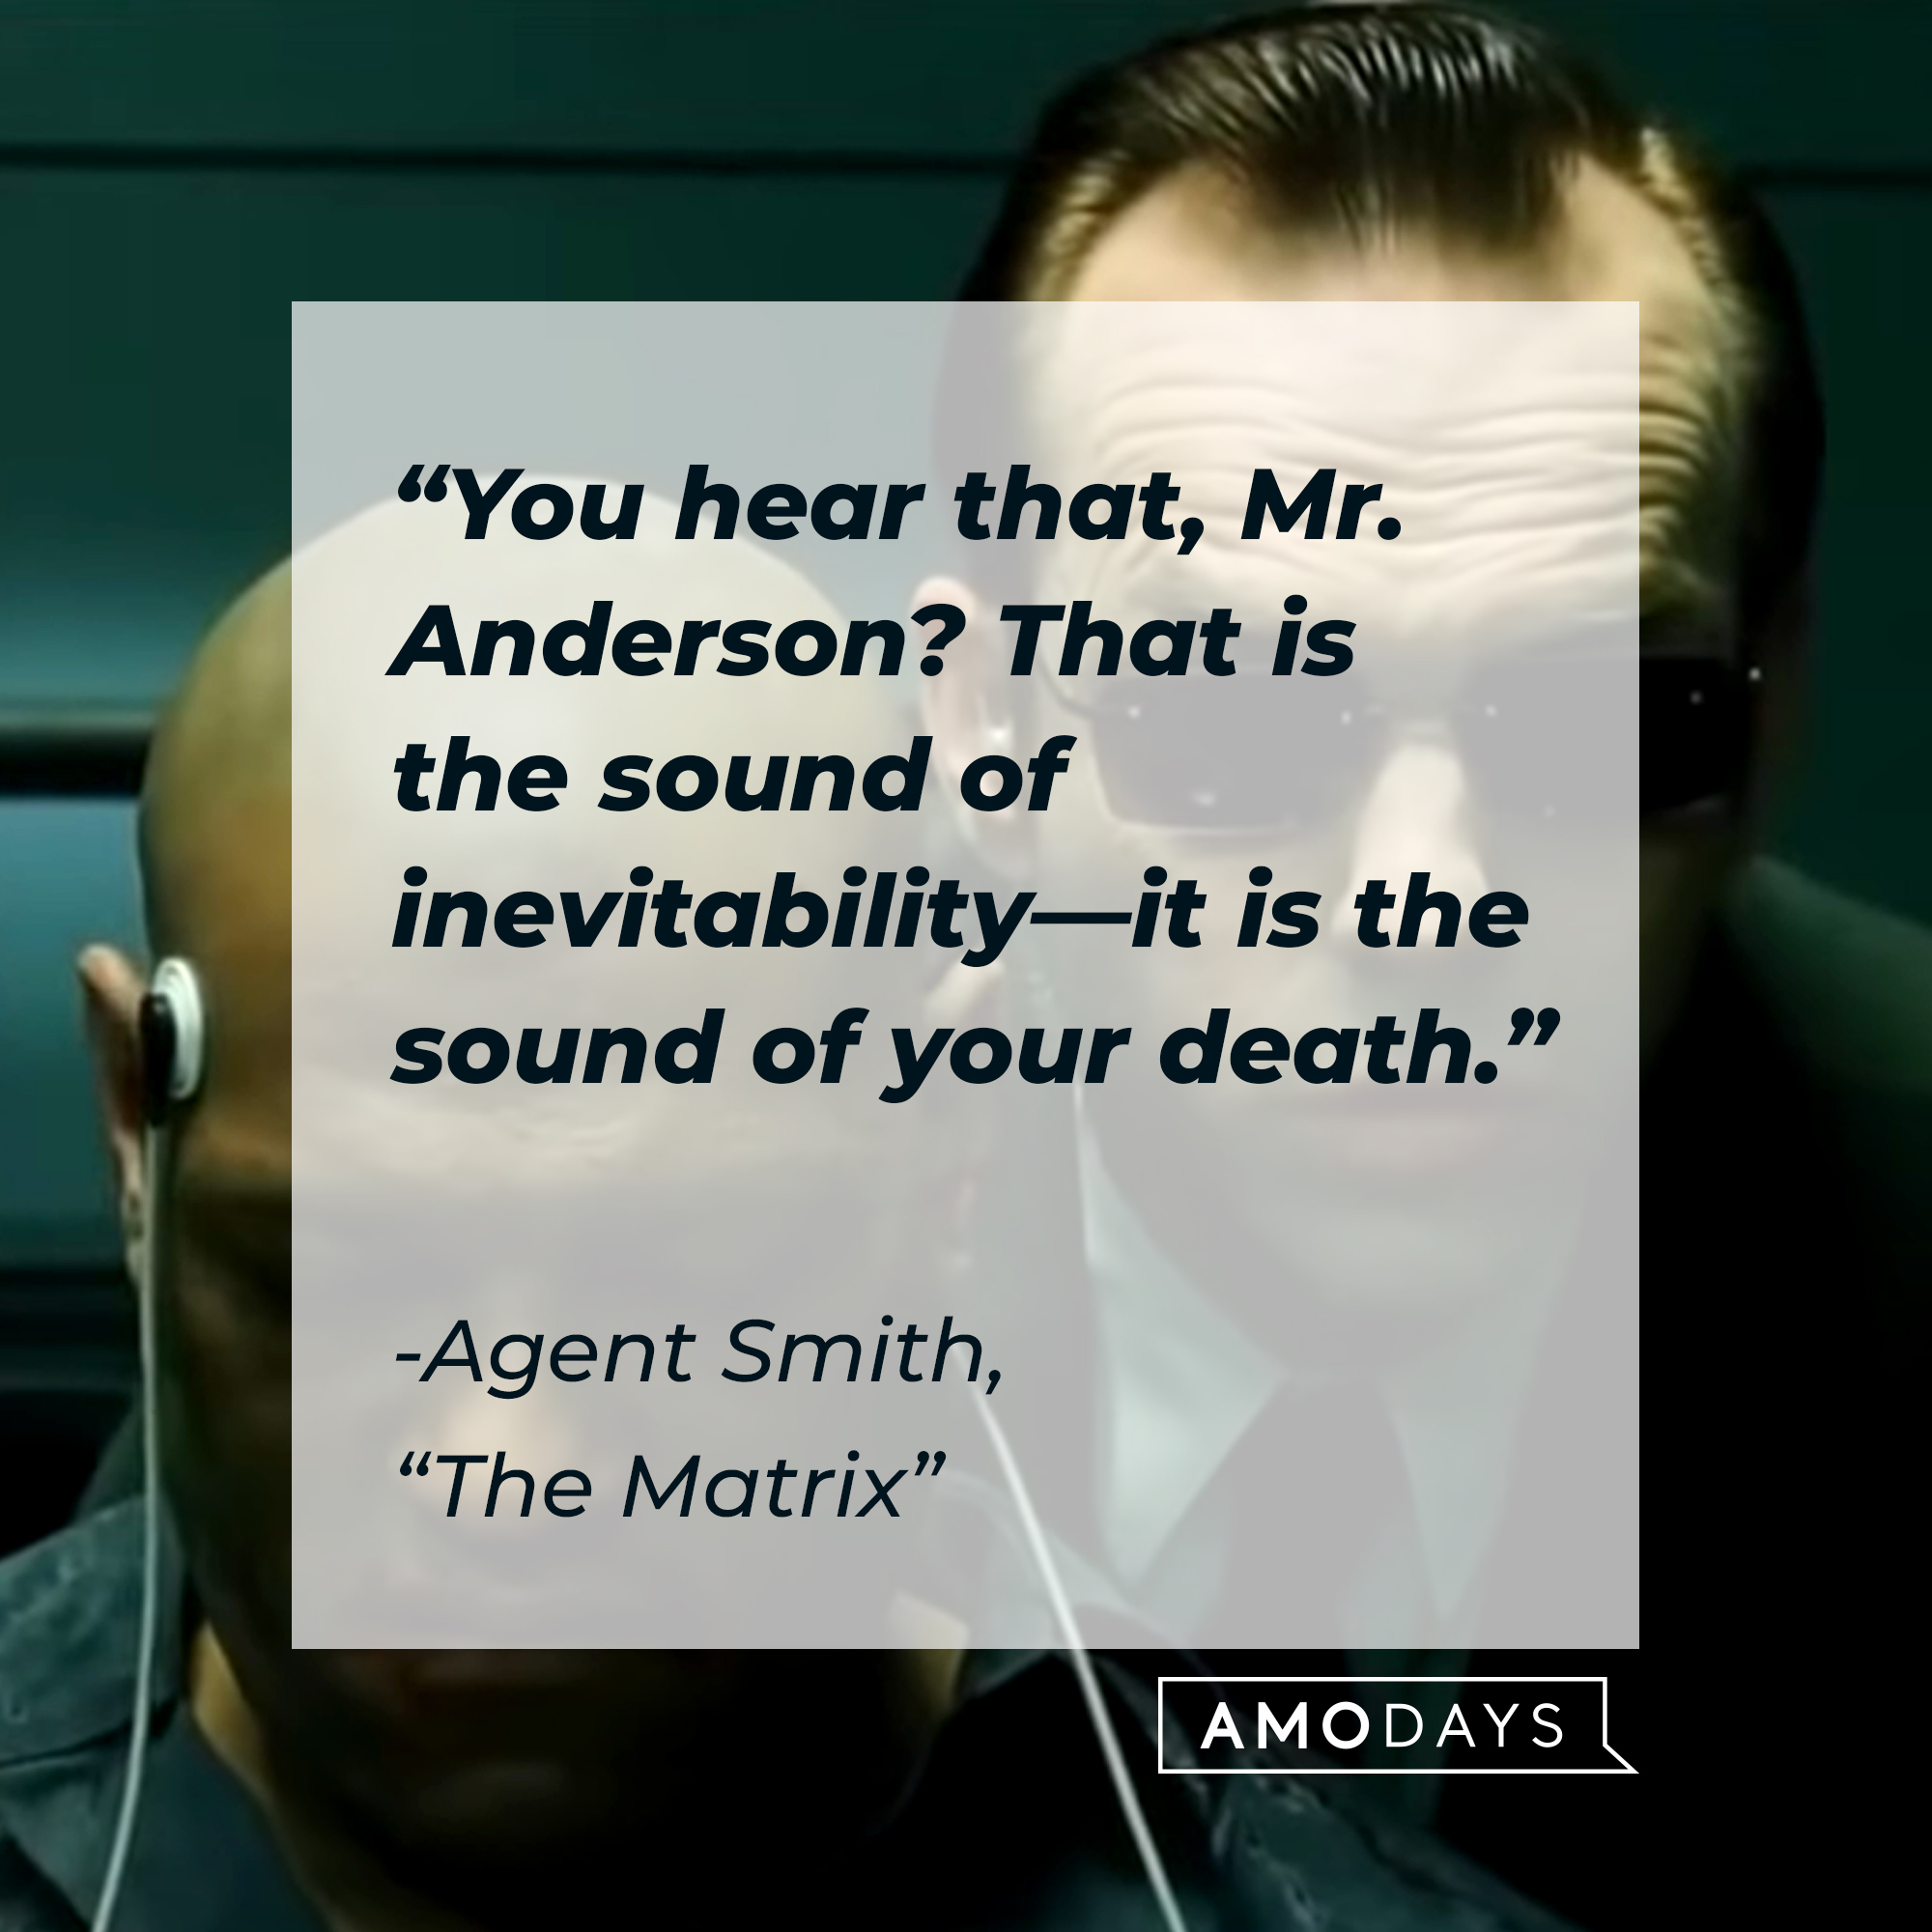 Agent Smith with his quote: "You hear that, Mr. Anderson? That is the sound of inevitability―it is the sound of your death." | Source: Facebook.com/TheMatrixMovie